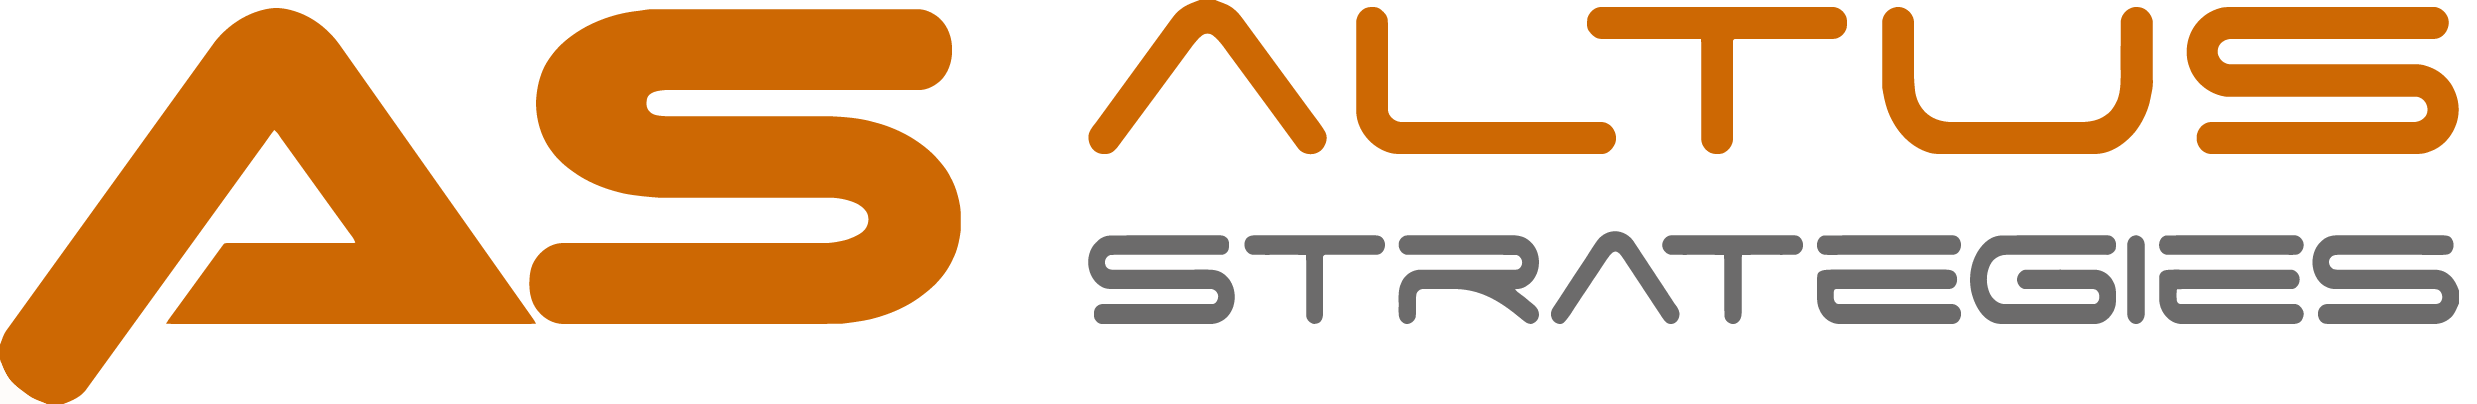 Altus Strategies Plc, Tuesday, January 26, 2021, Press release picture